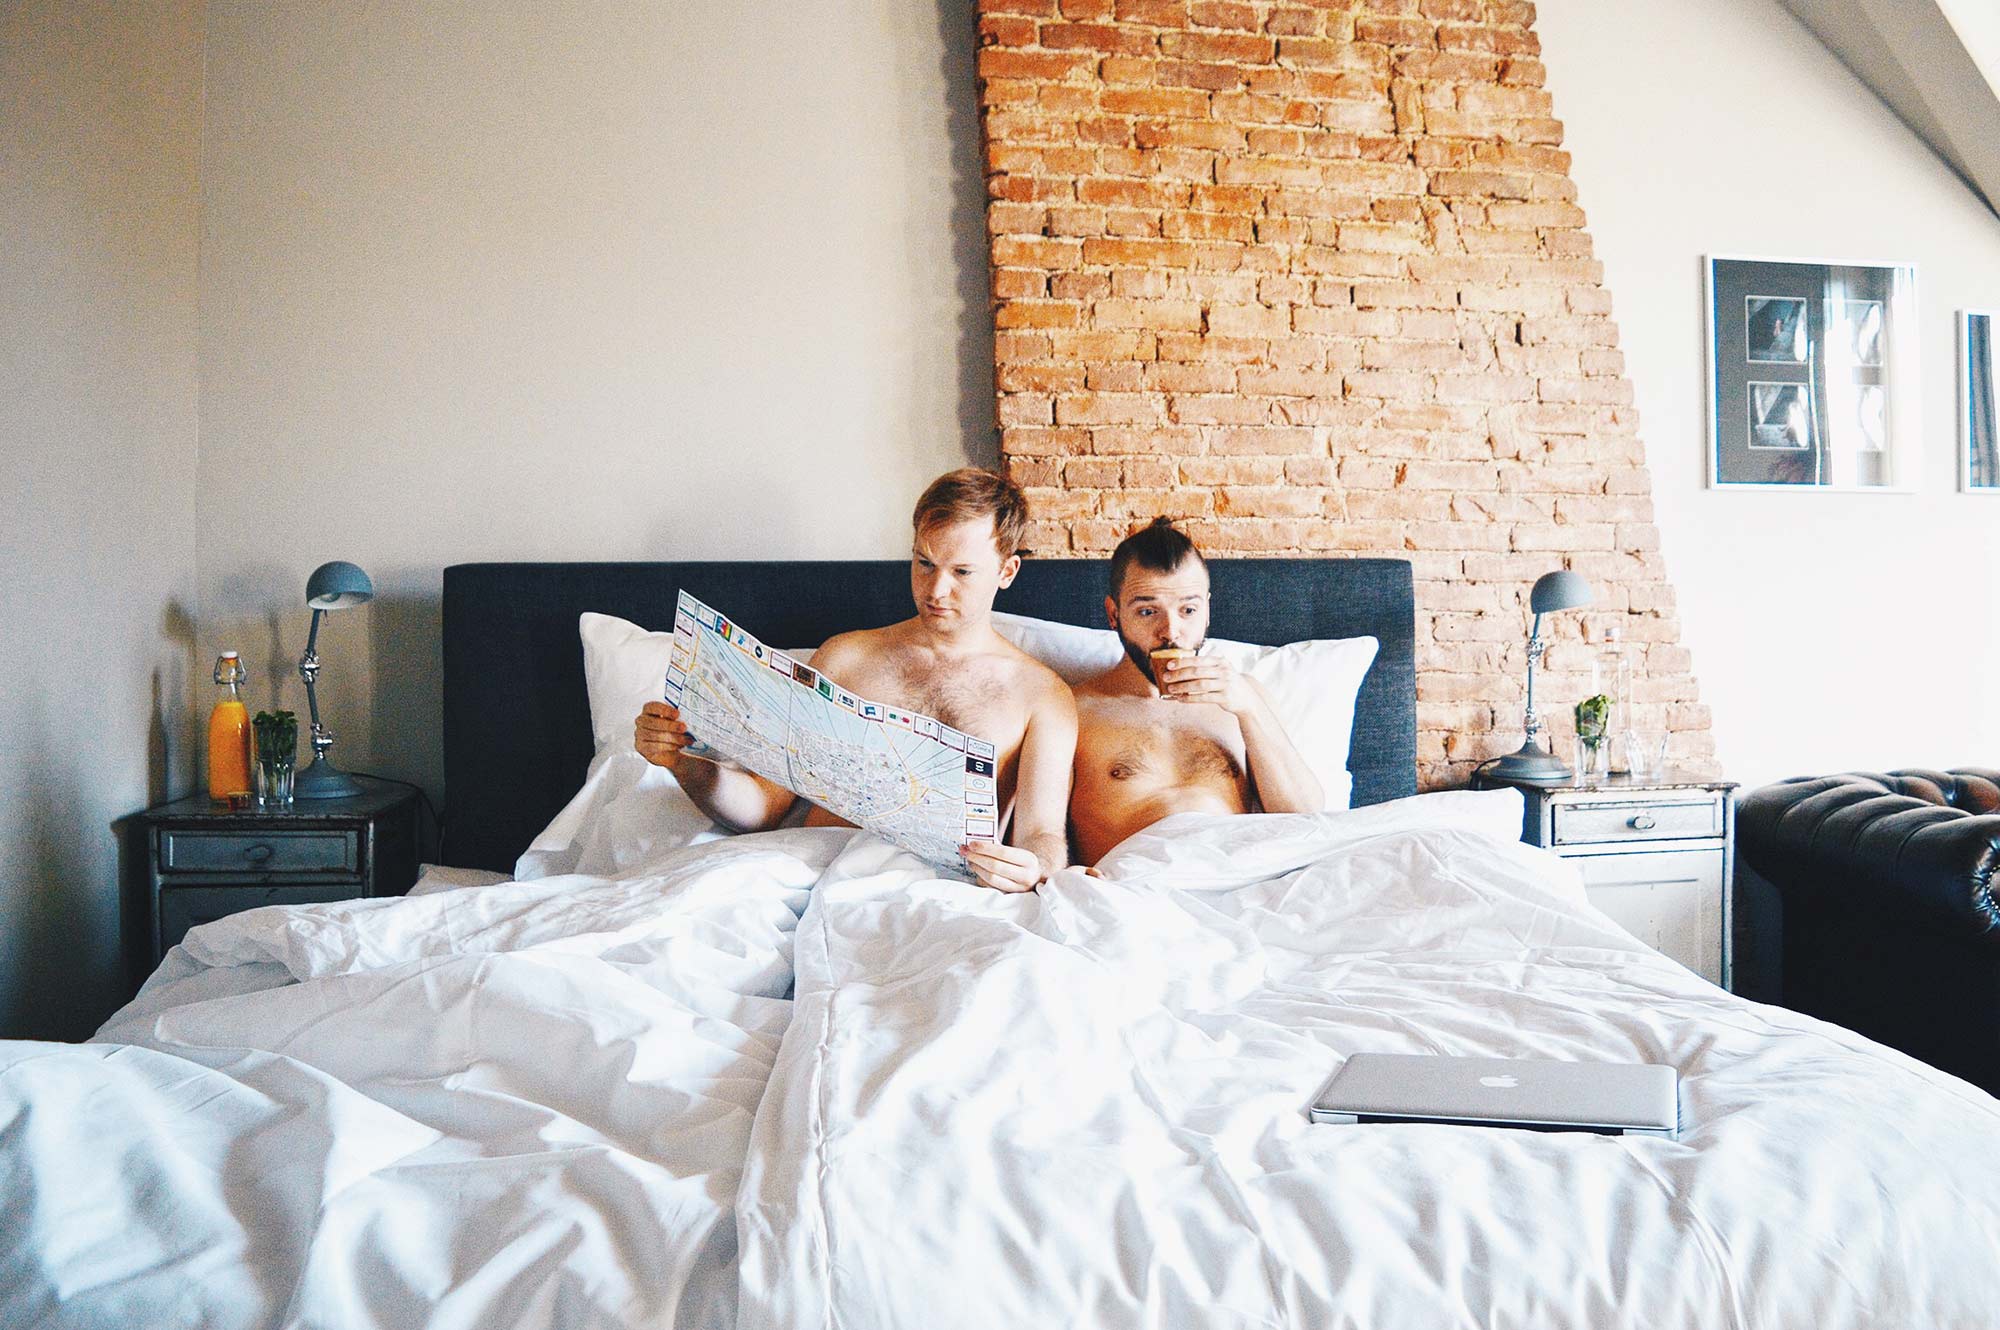 Gay-friendly Hotels worldwide tested by a Couple of Men